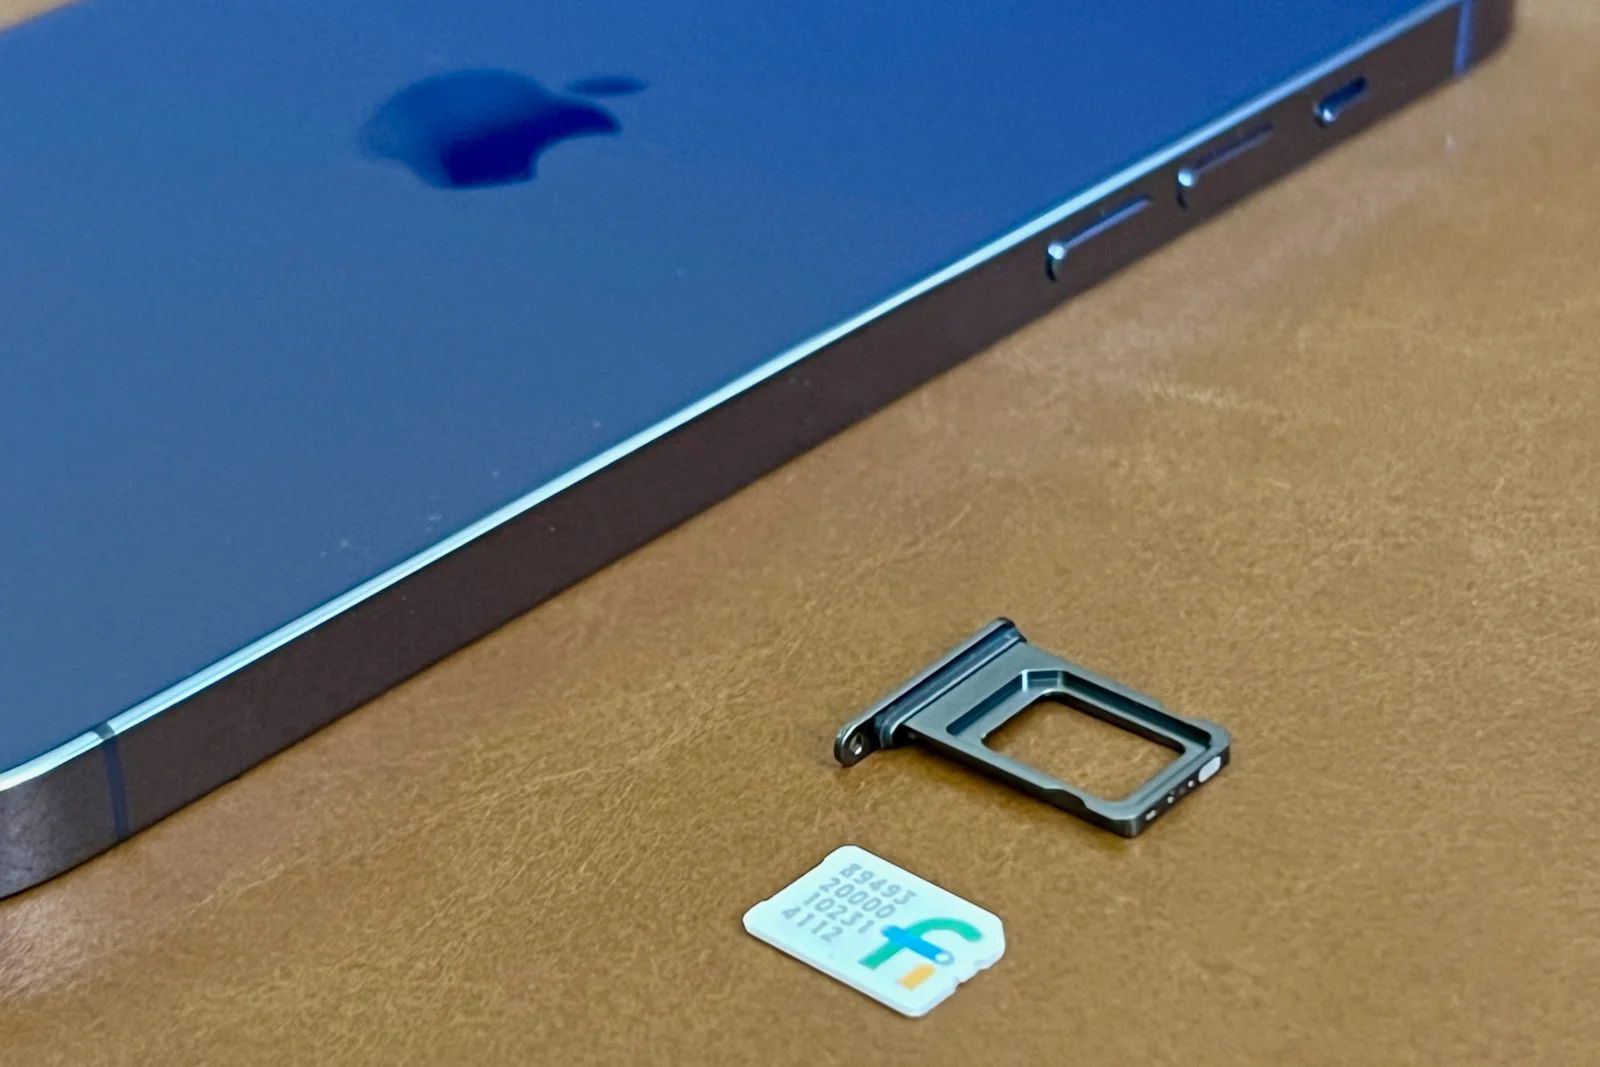 removing-sim-card-from-iphone-11-a-step-by-step-guide